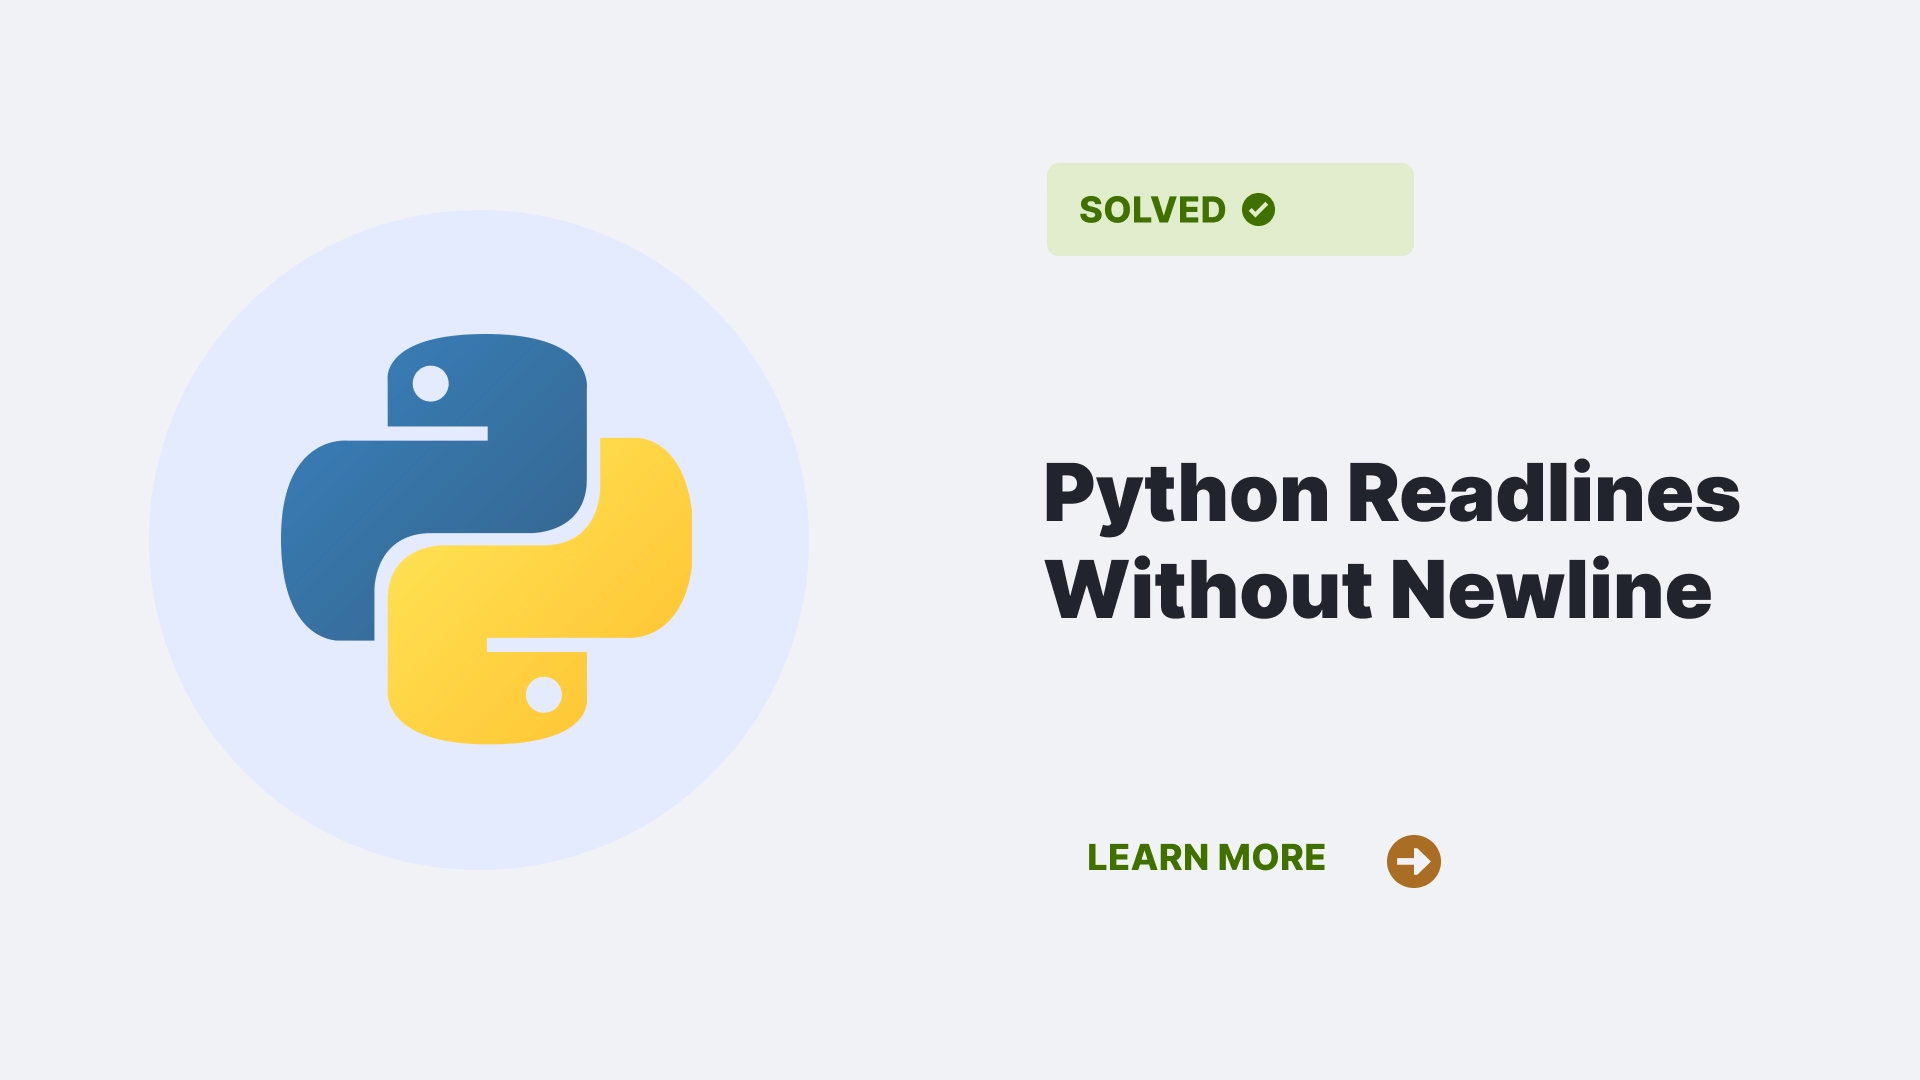 Follow PythonClear to learn more about Python errors and modules